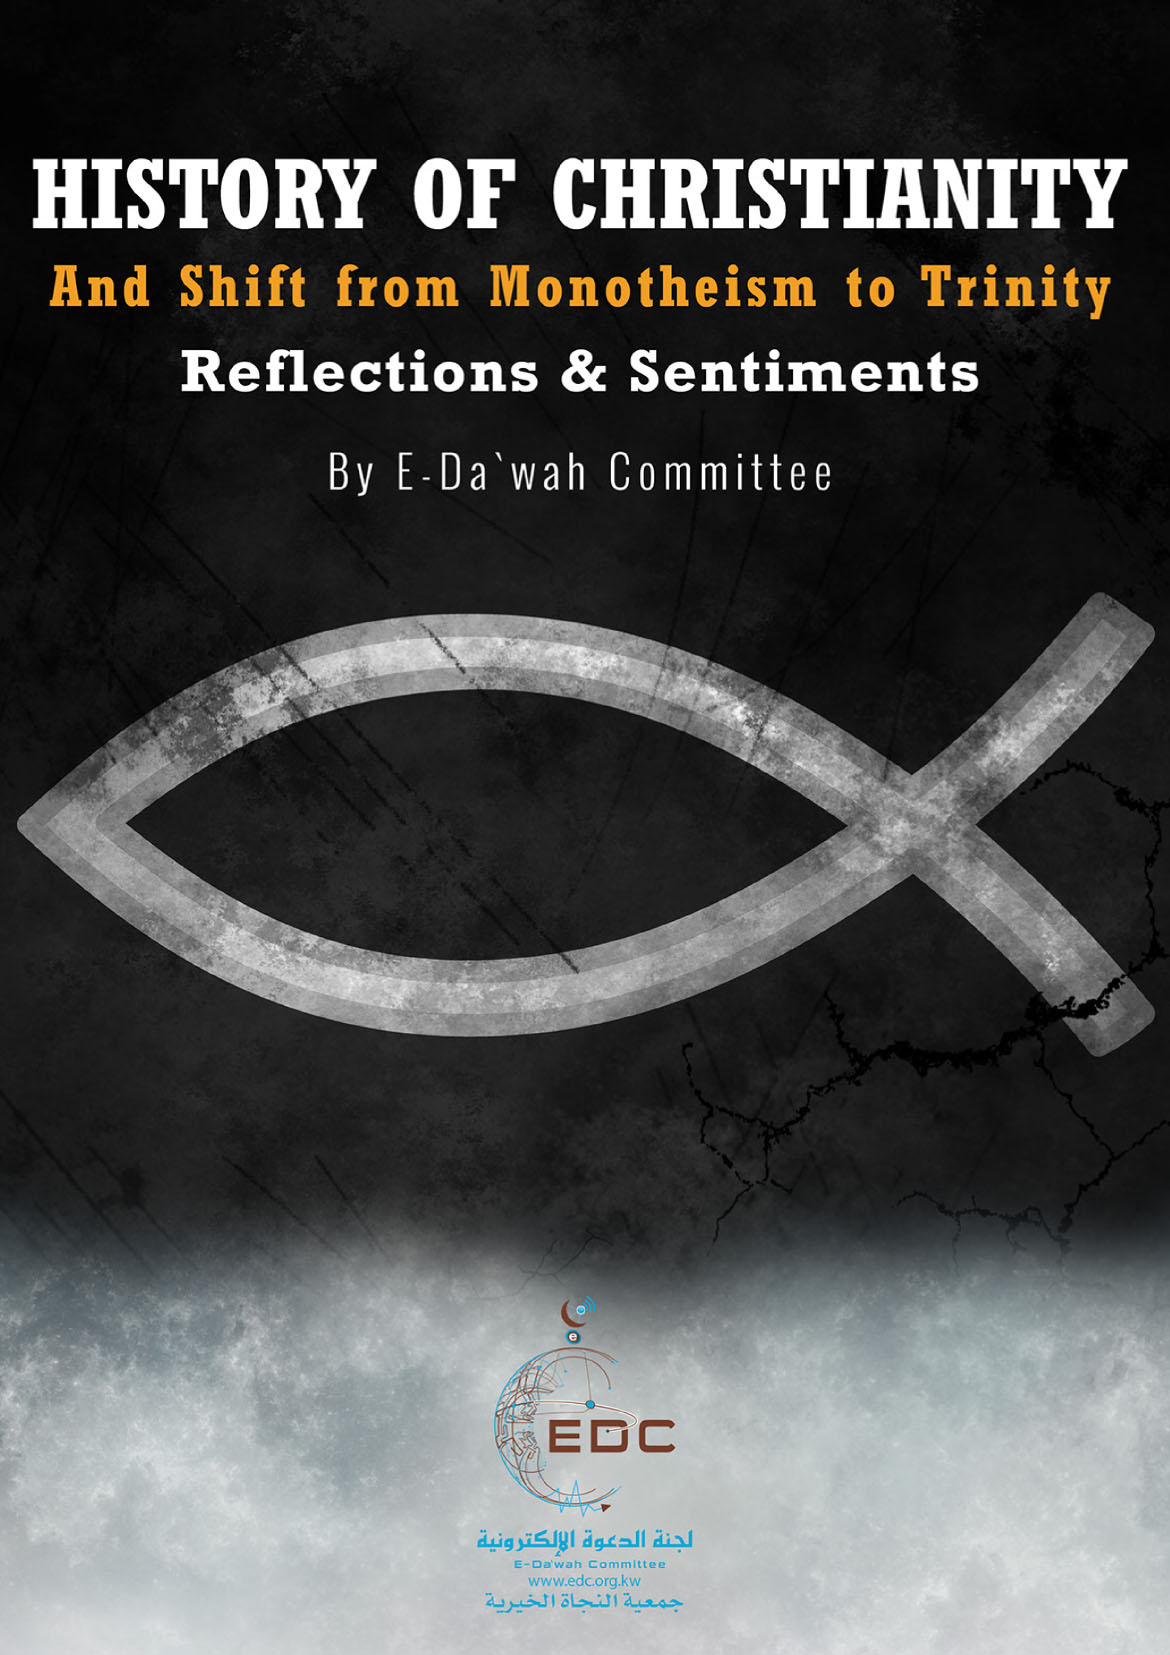 en_History_of_Christianity_Shift_from_Monotheism_to_Trinity_Reflections_Sentiments-1